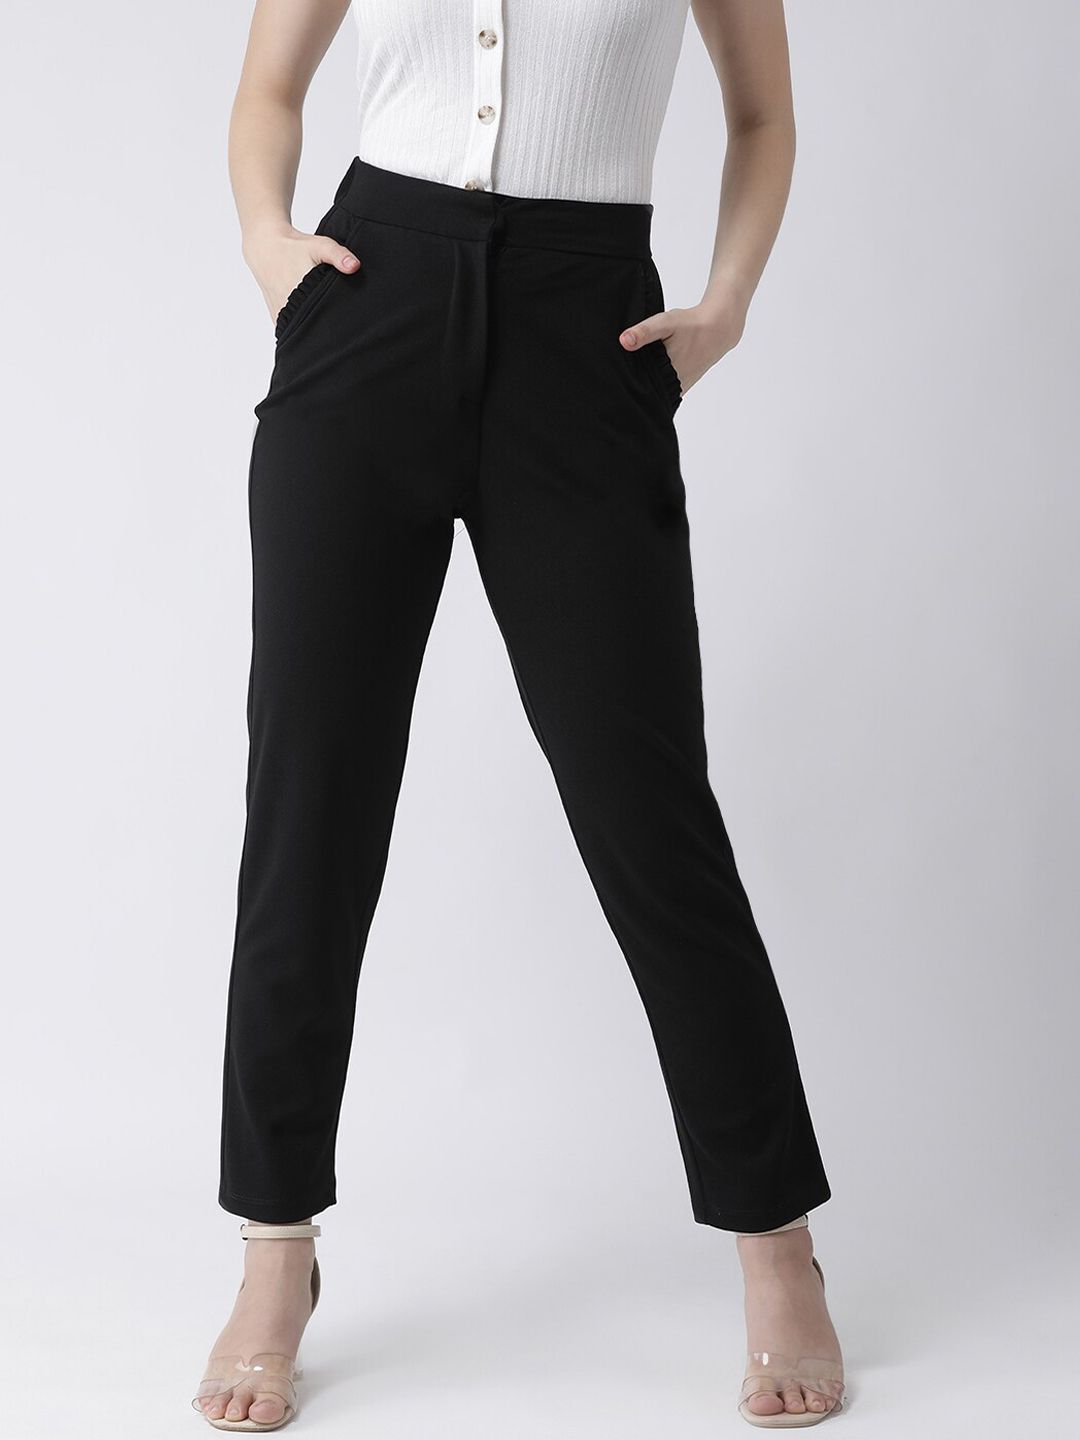 KASSUALLY Women Black Trousers Price in India